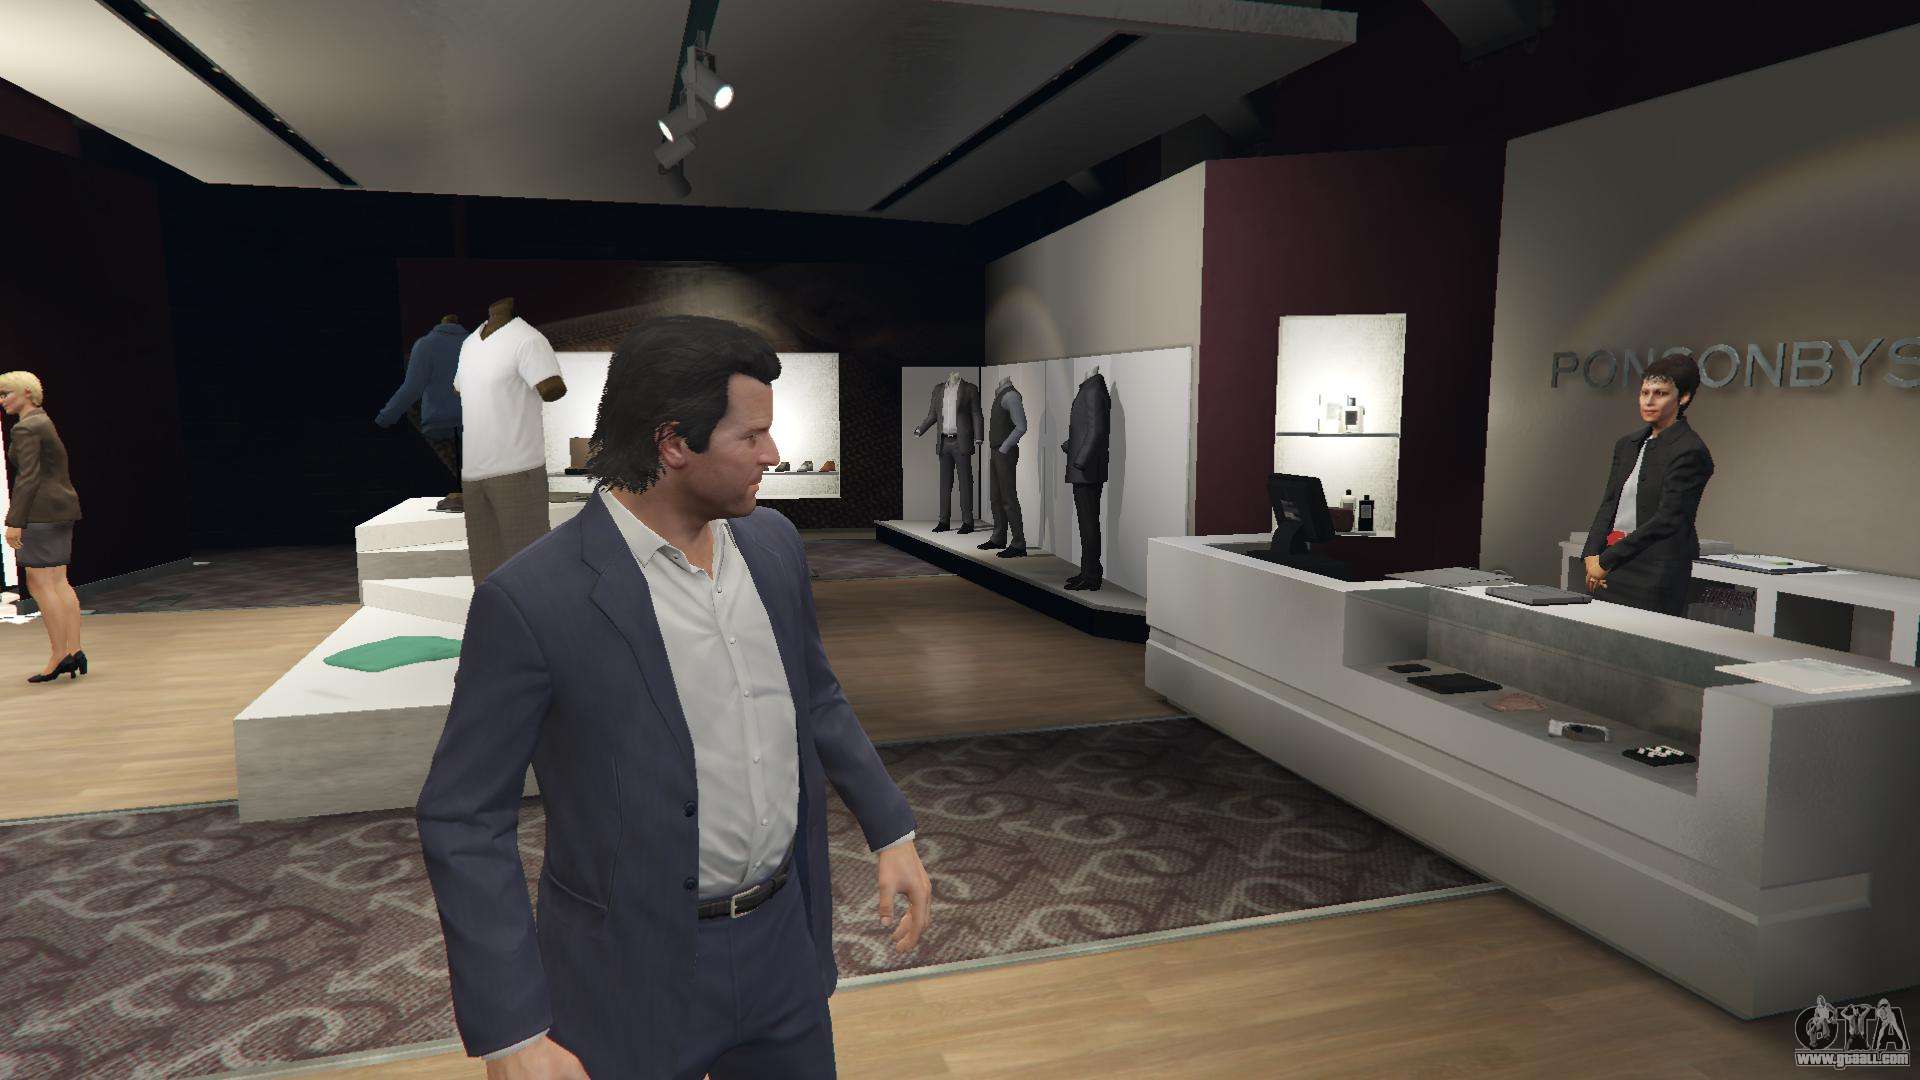 gta 5 online clothing stores